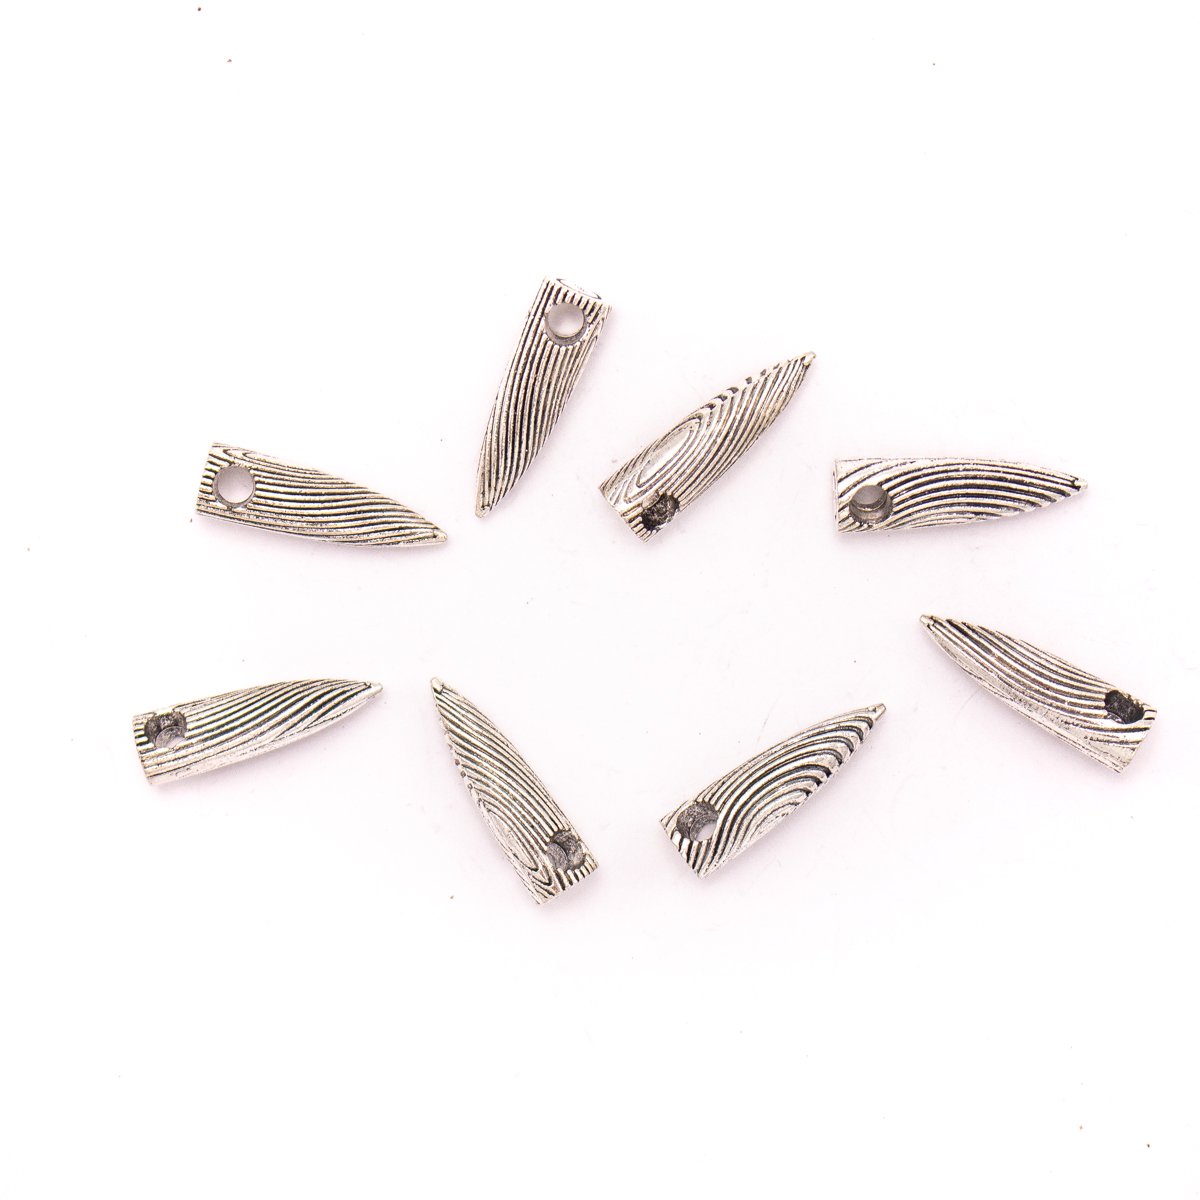 5PCS For 5mm leather antique silver zamak 5mm Round awl accessoriesJewelry supply Findings Components- D-5-5-166